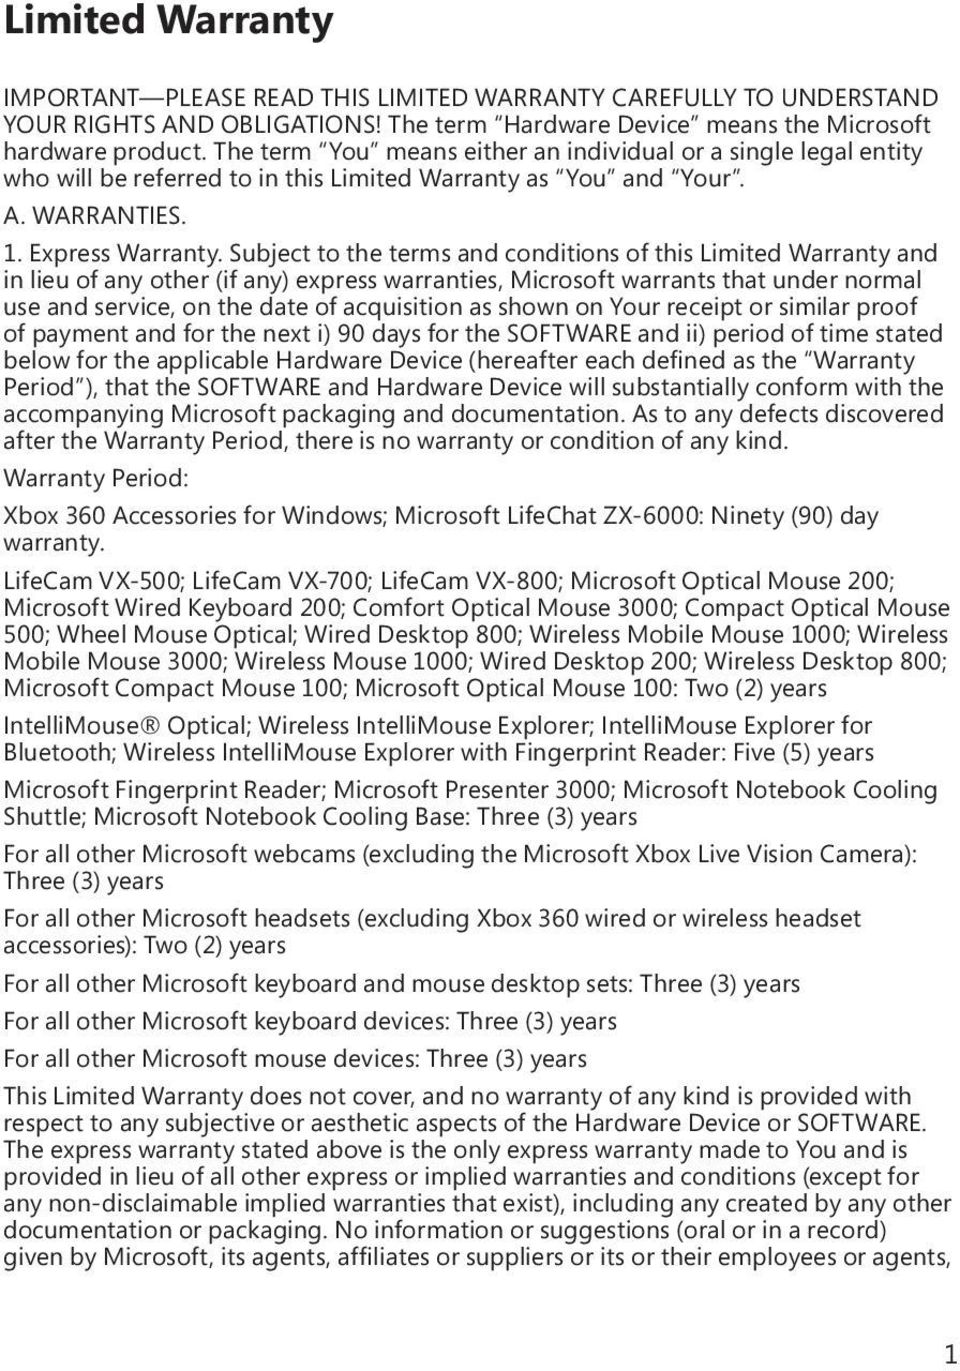 Subject to the terms and conditions of this Limited Warranty and in lieu of any other (if any) express warranties, Microsoft warrants that under normal use and service, on the date of acquisition as